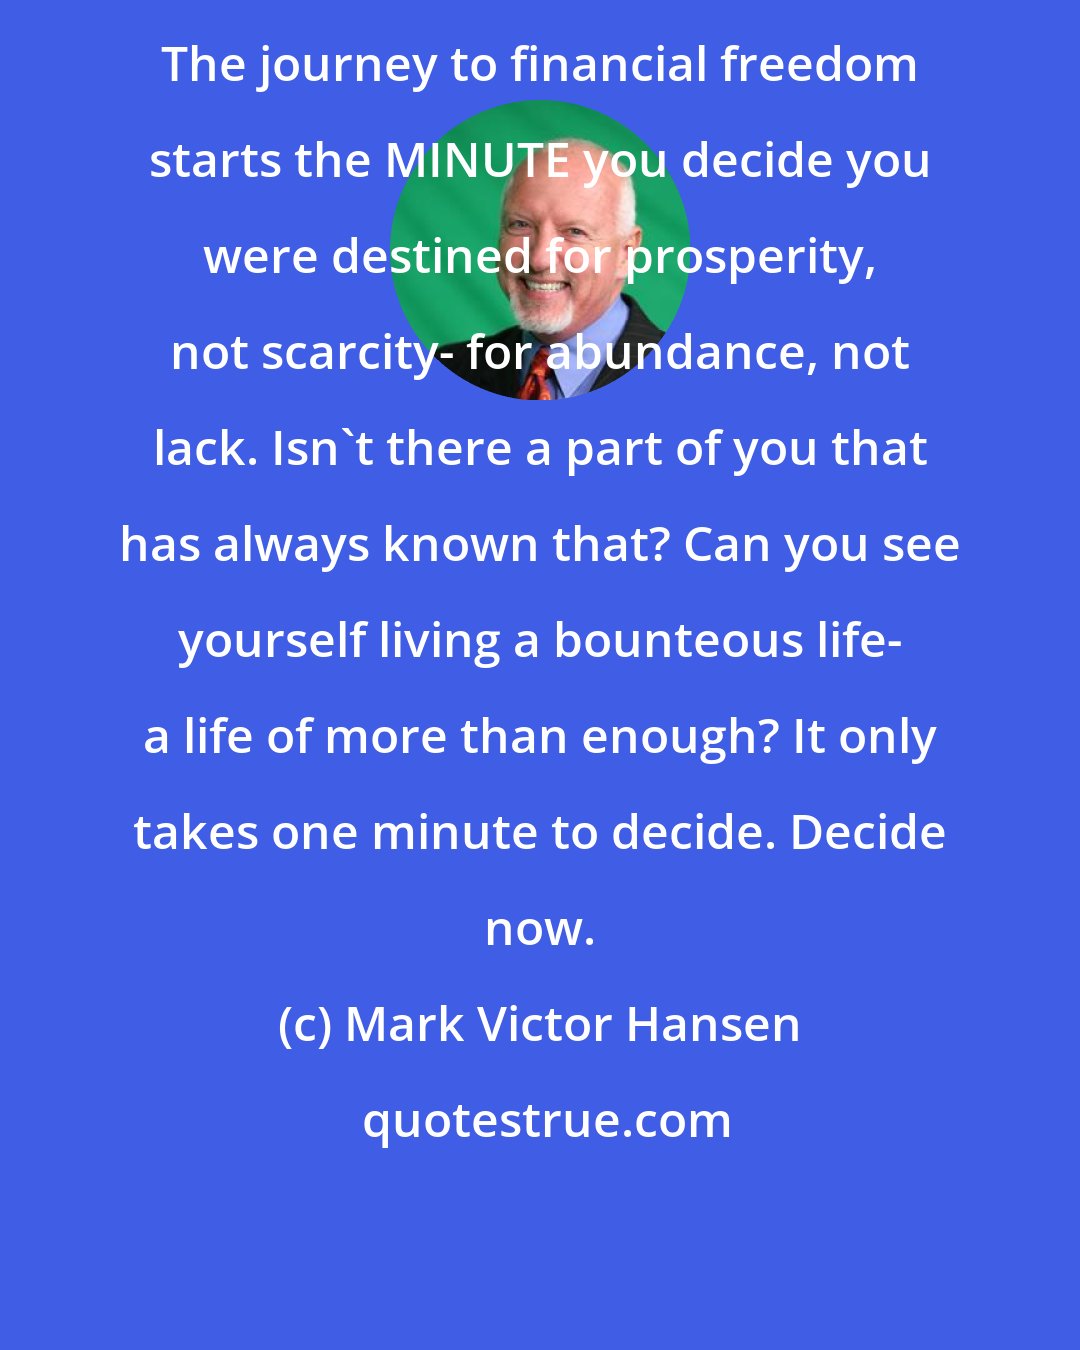 Mark Victor Hansen: The journey to financial freedom starts the MINUTE you decide you were destined for prosperity, not scarcity- for abundance, not lack. Isn't there a part of you that has always known that? Can you see yourself living a bounteous life- a life of more than enough? It only takes one minute to decide. Decide now.